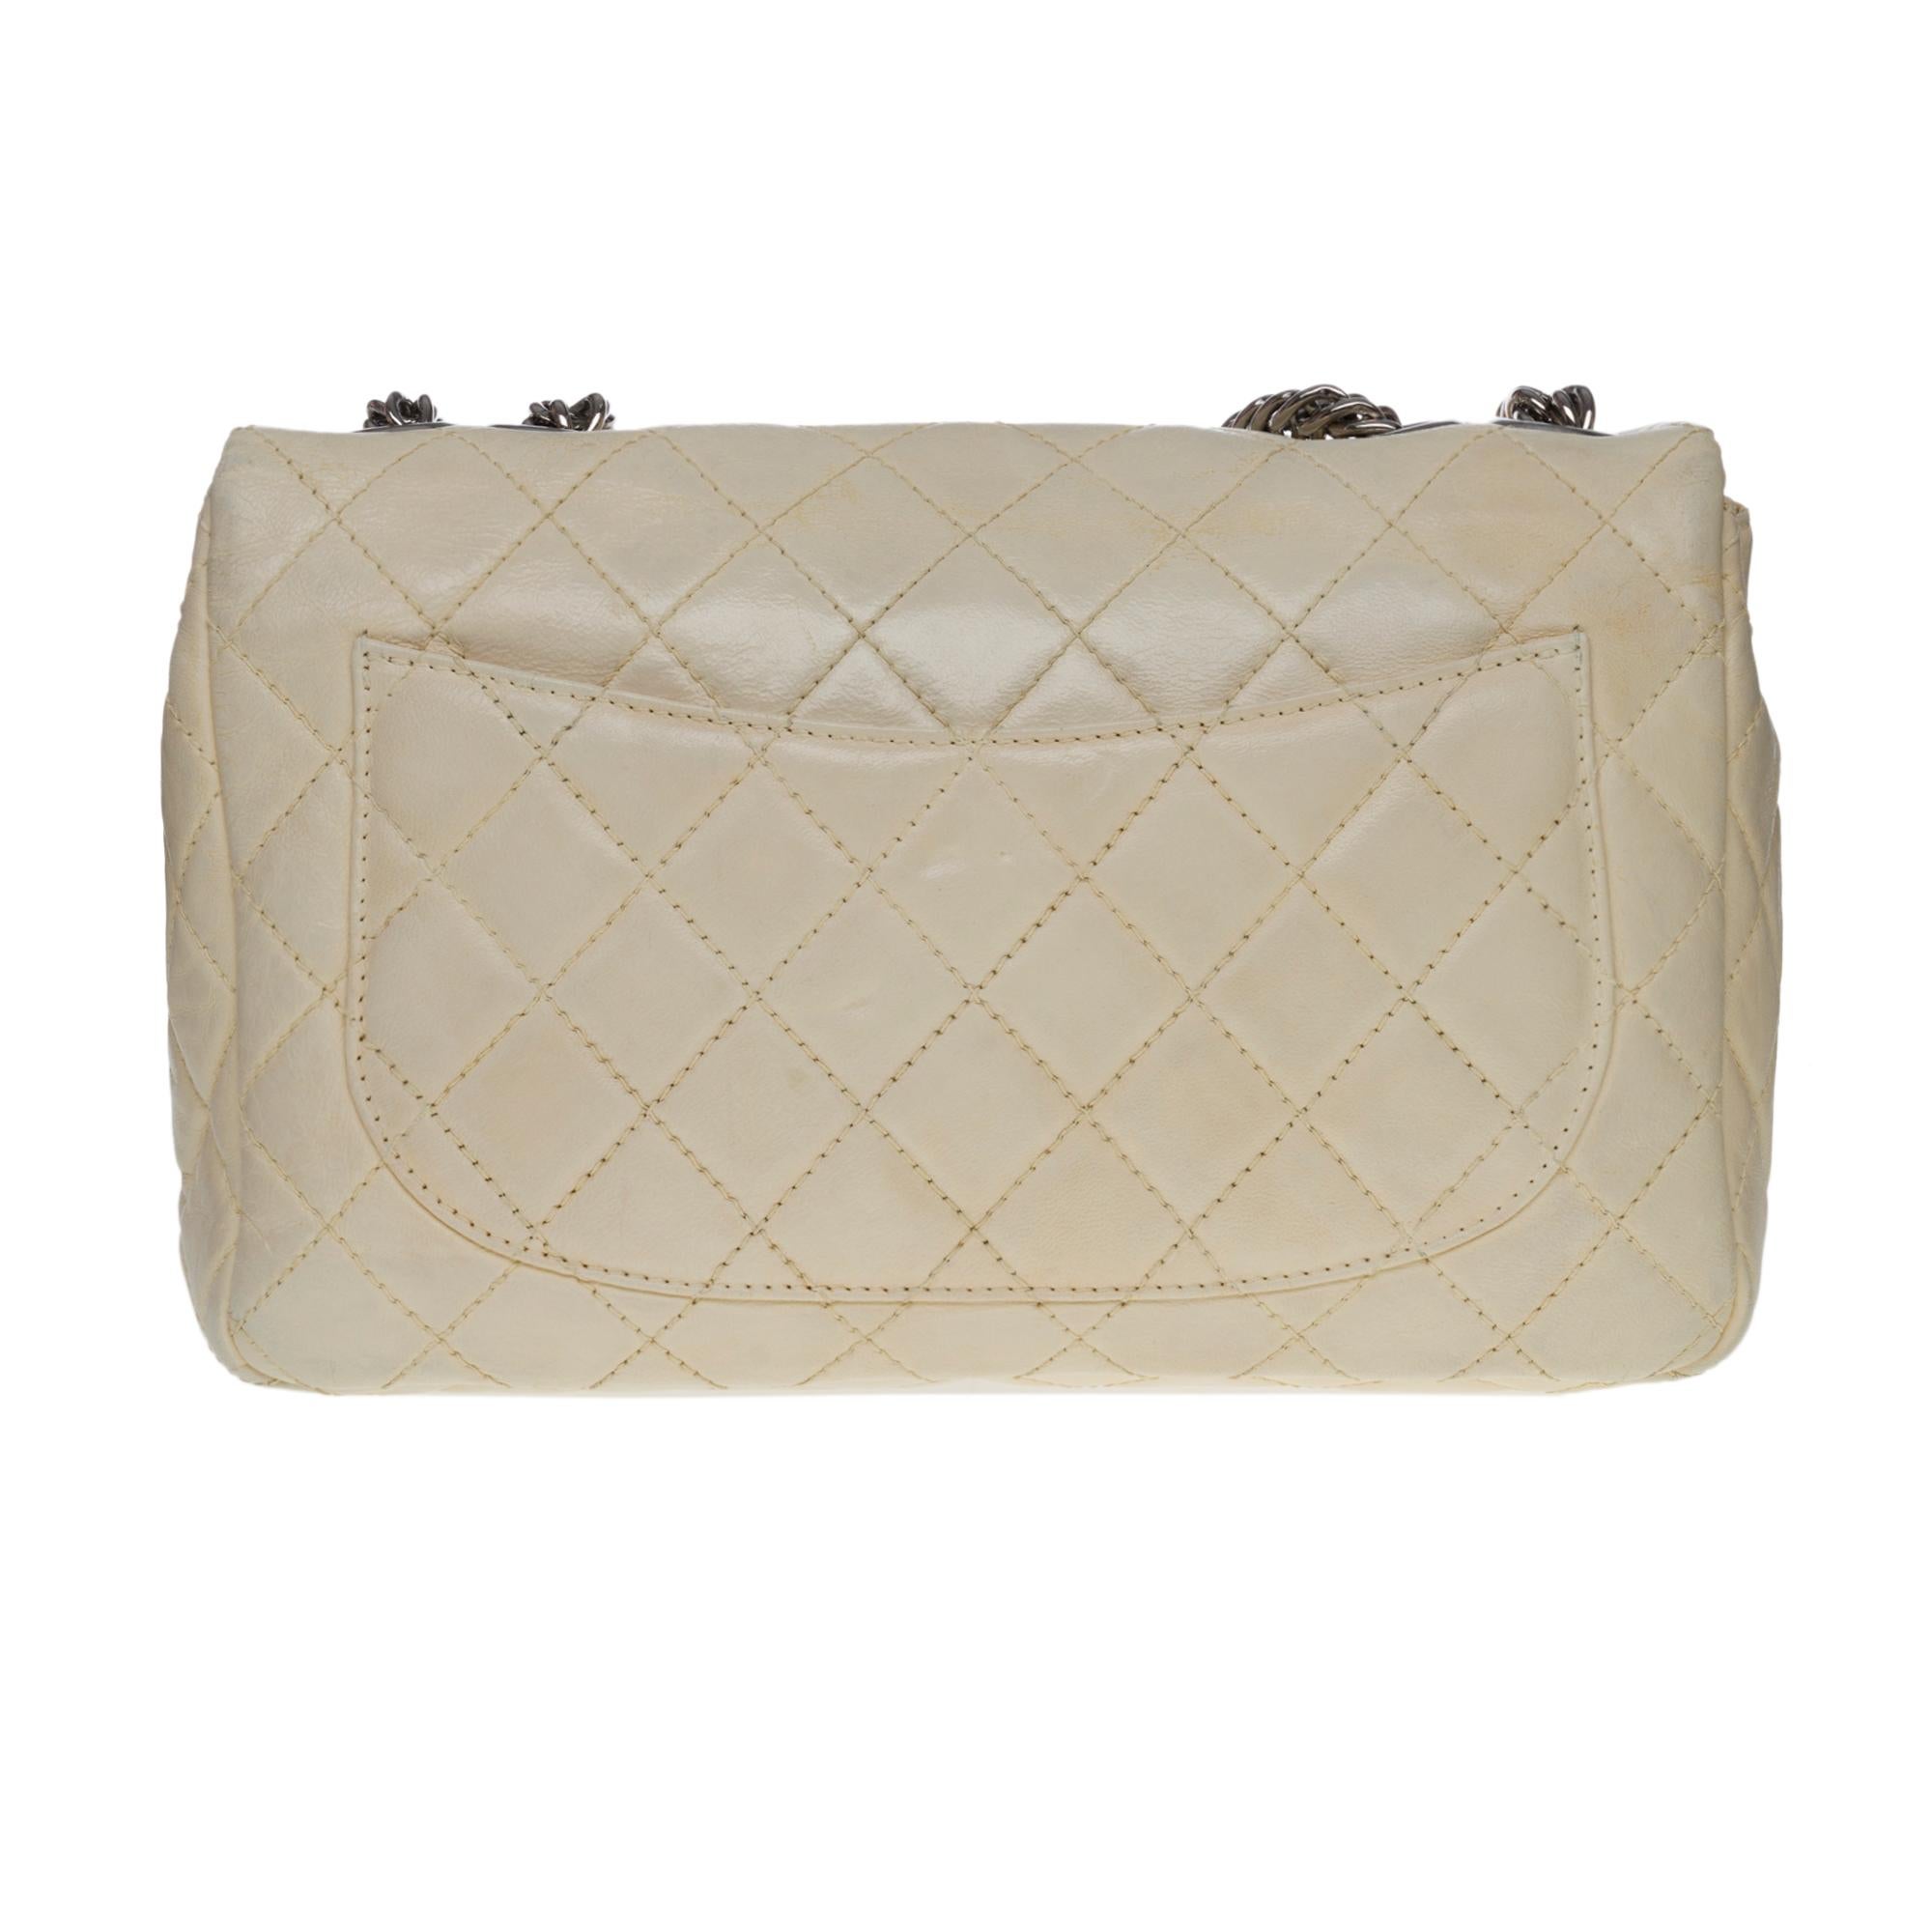 Stunning and Rare Chanel Timeless/Classique double flap shoulder bag in beige quilted lambskin leather (egg shell), silver-plated metal hardware, silver-plated metal snake chain allowing a hand, shoulder or cross carry
Flap closure, silver CC logo